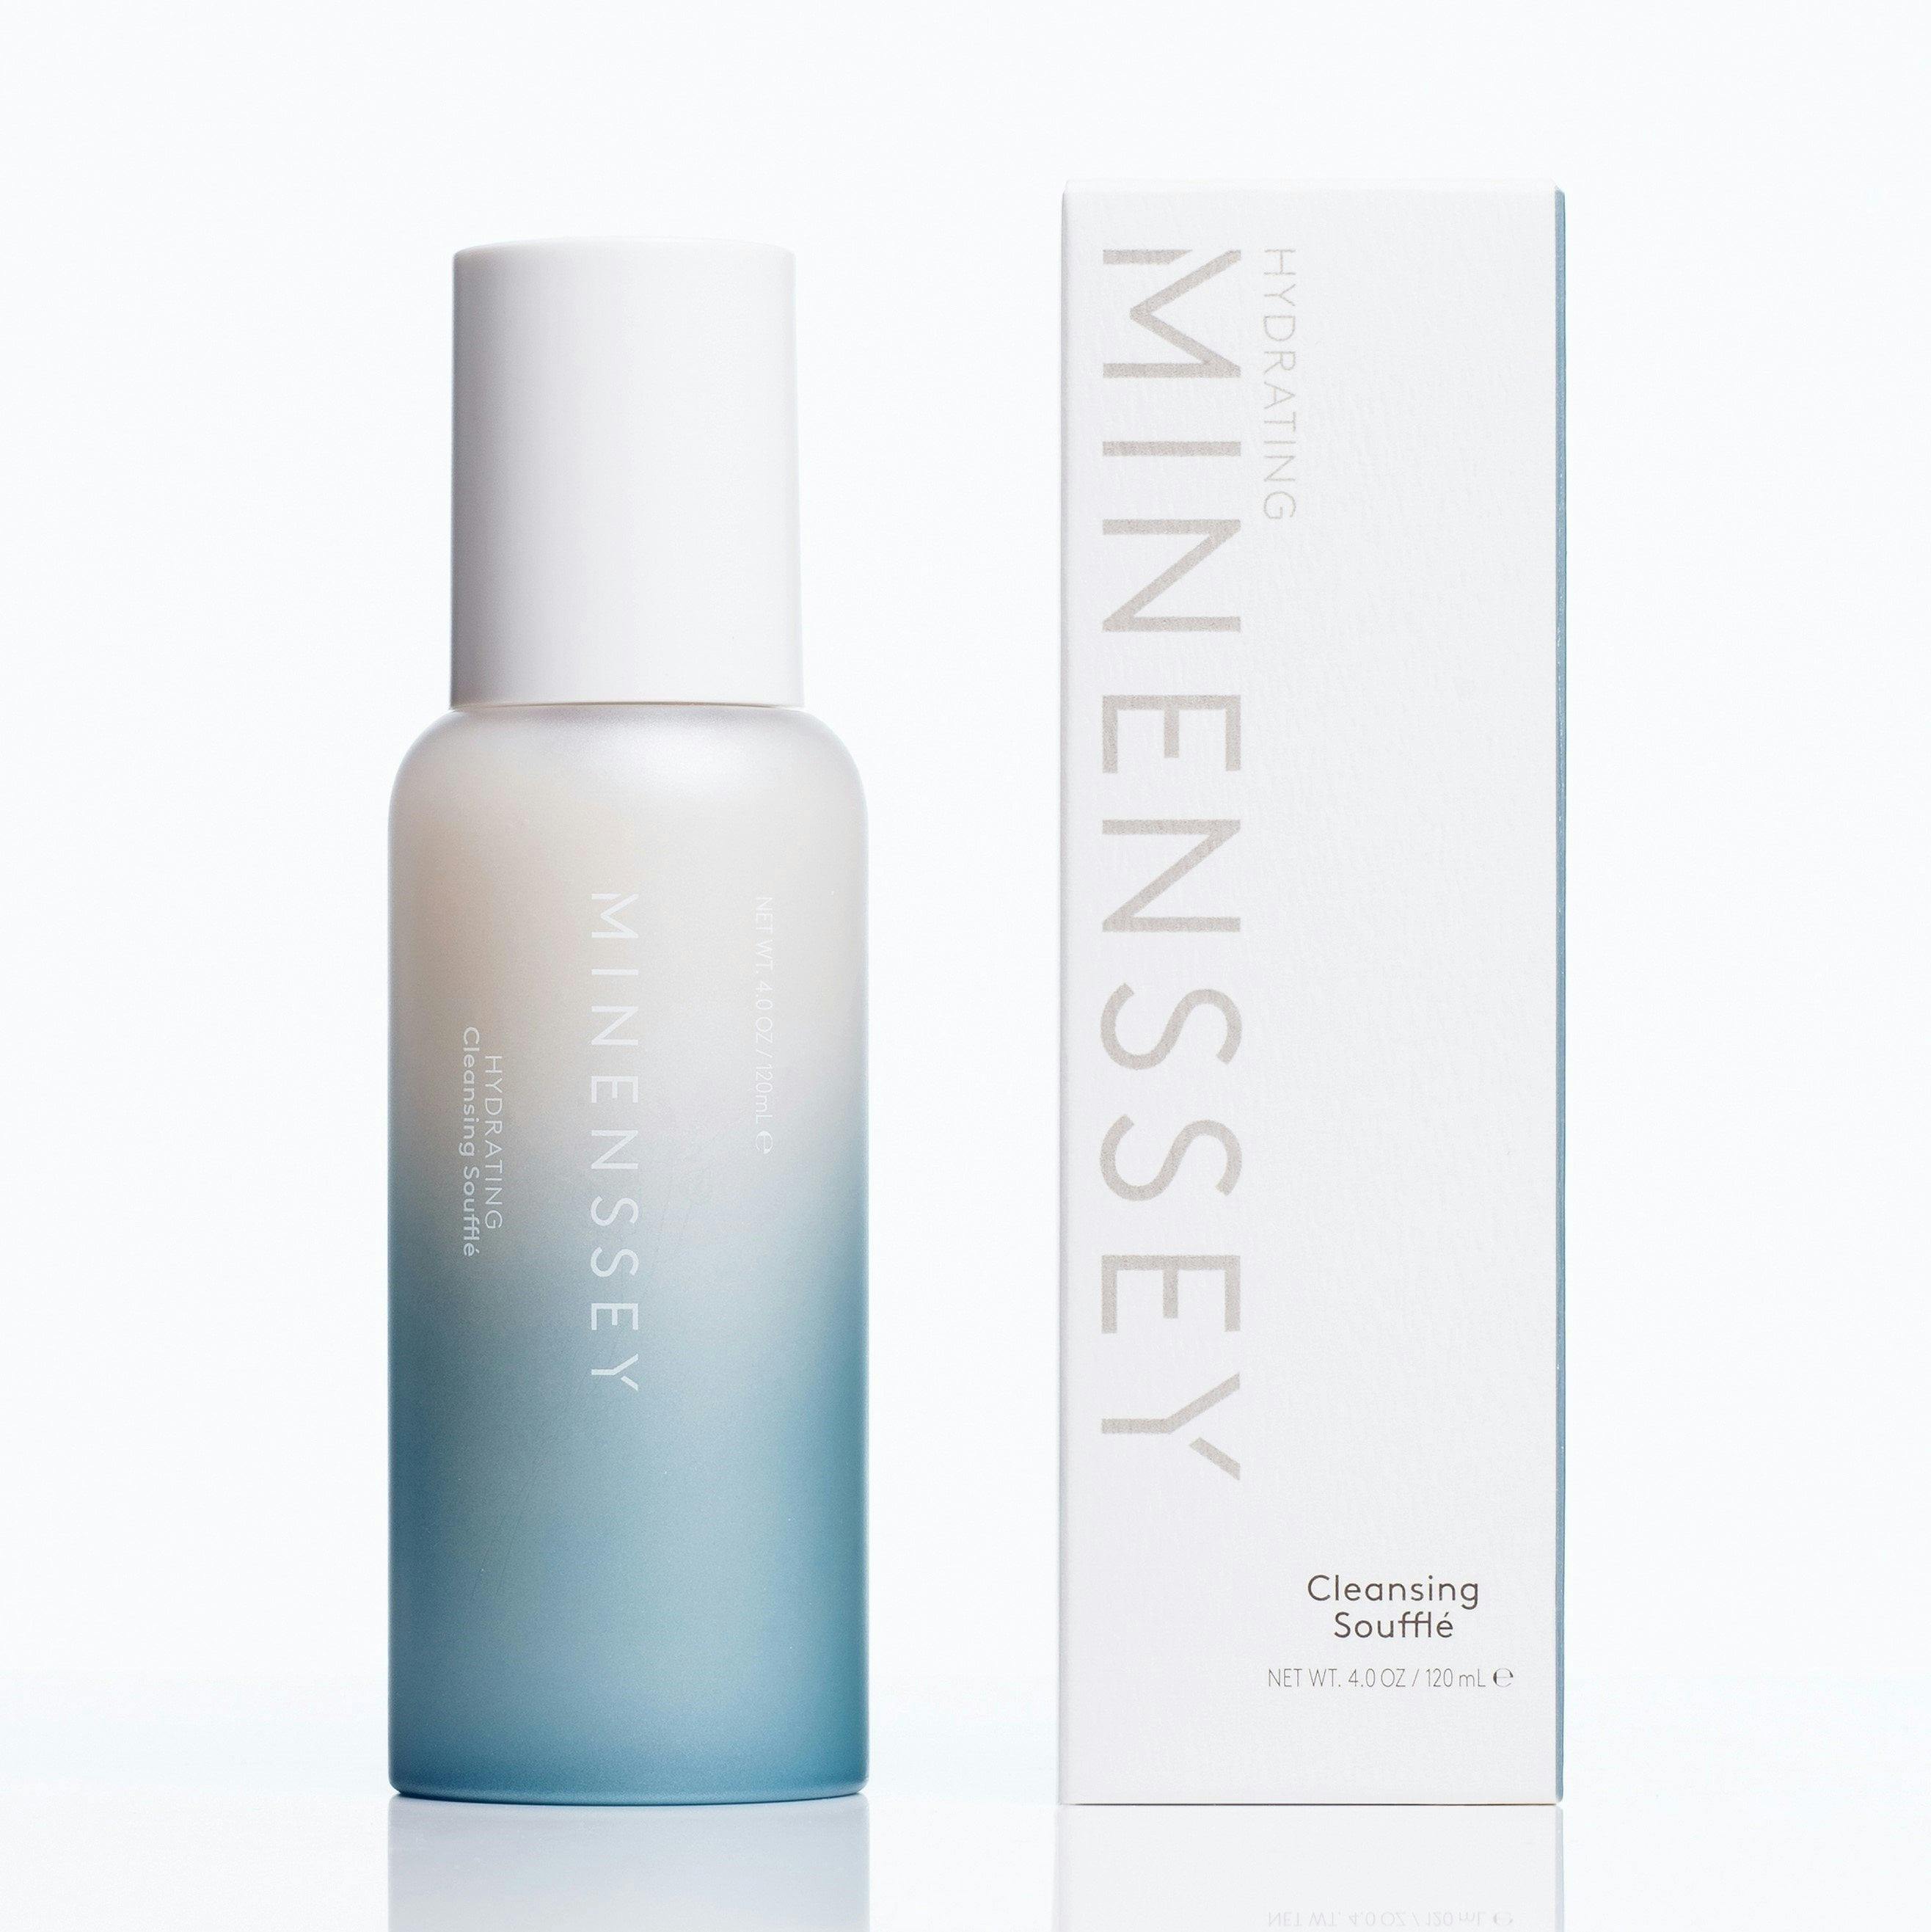 MINENSSEY Hydrating Cleansing Soufflé 120ml